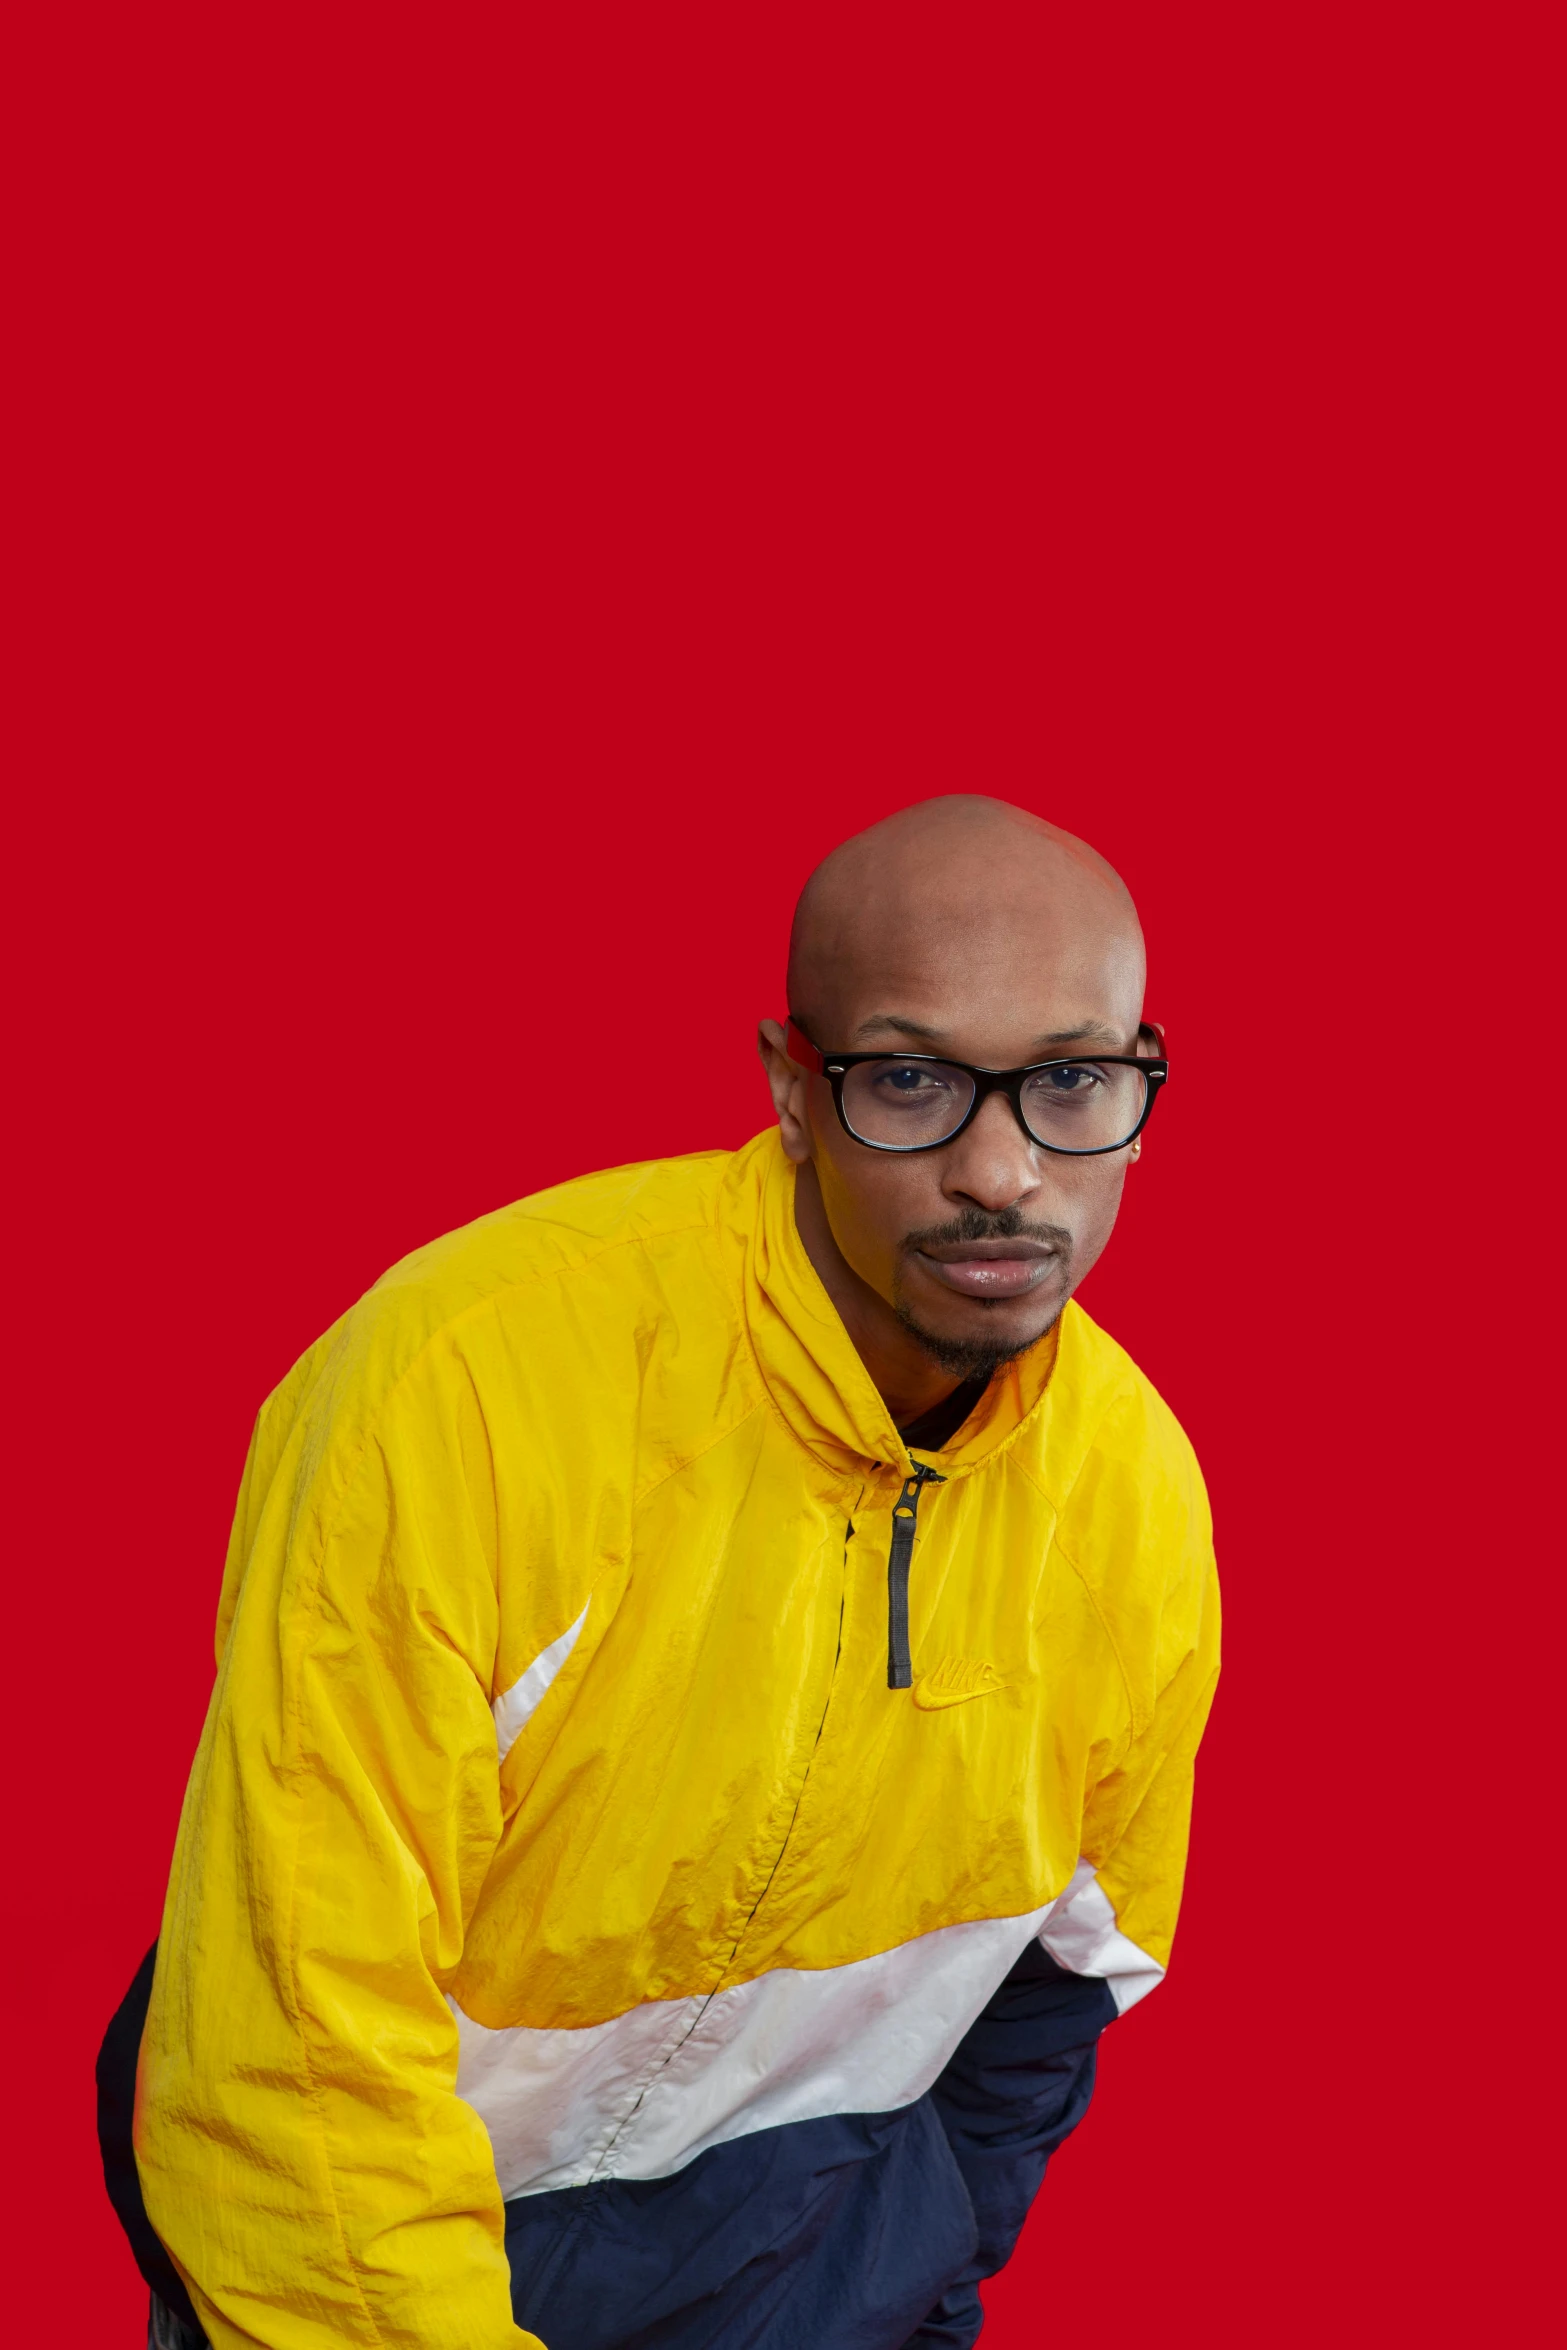 a man with glasses is standing near a red background